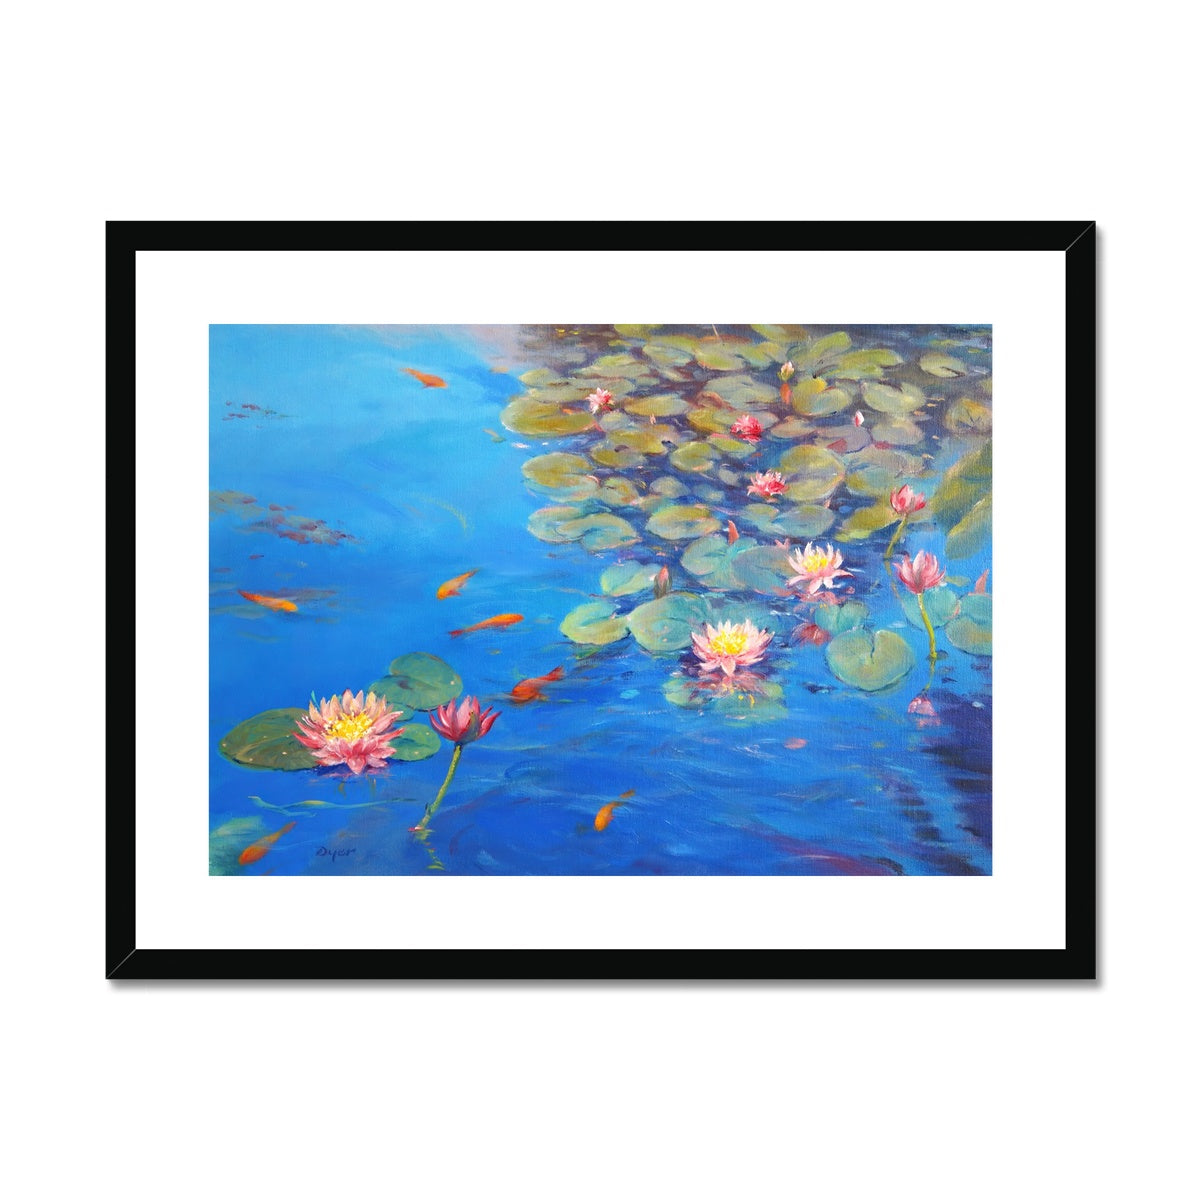 Ted Dyer Framed Open Edition Cornish Fine Art Print. &#39;Water lilies and Sky Reflections, Kimberley Park Pond Garden, Falmouth&#39;. Cornwall Art Gallery